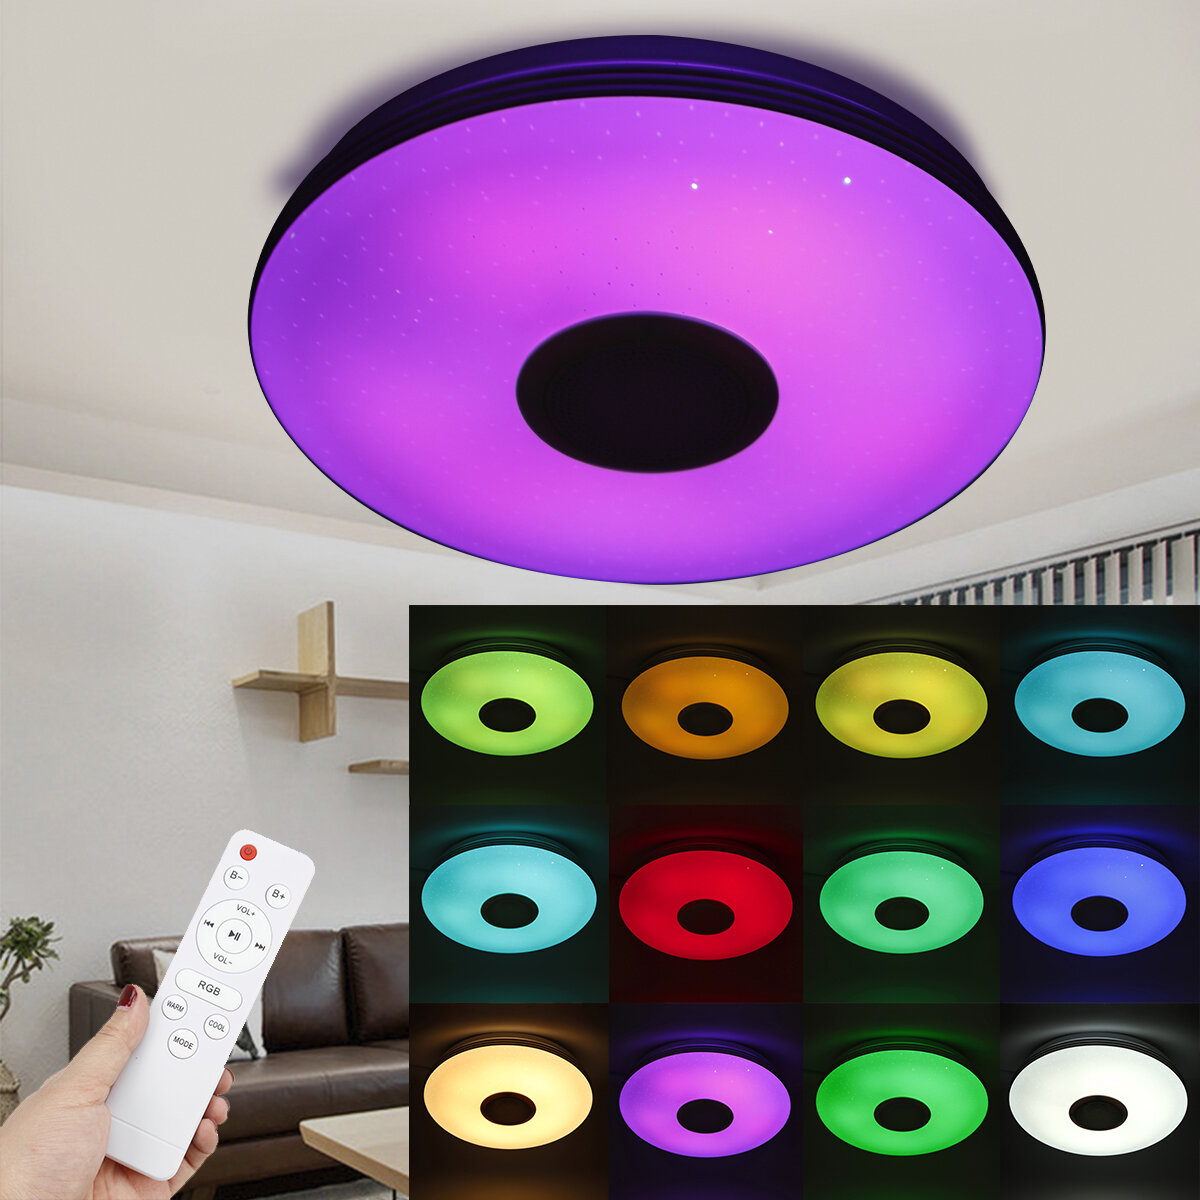 

85-265V 30CM LED Ceiling Light RGB bluetooth Music Dimmable Lamp APP + Remote Controller